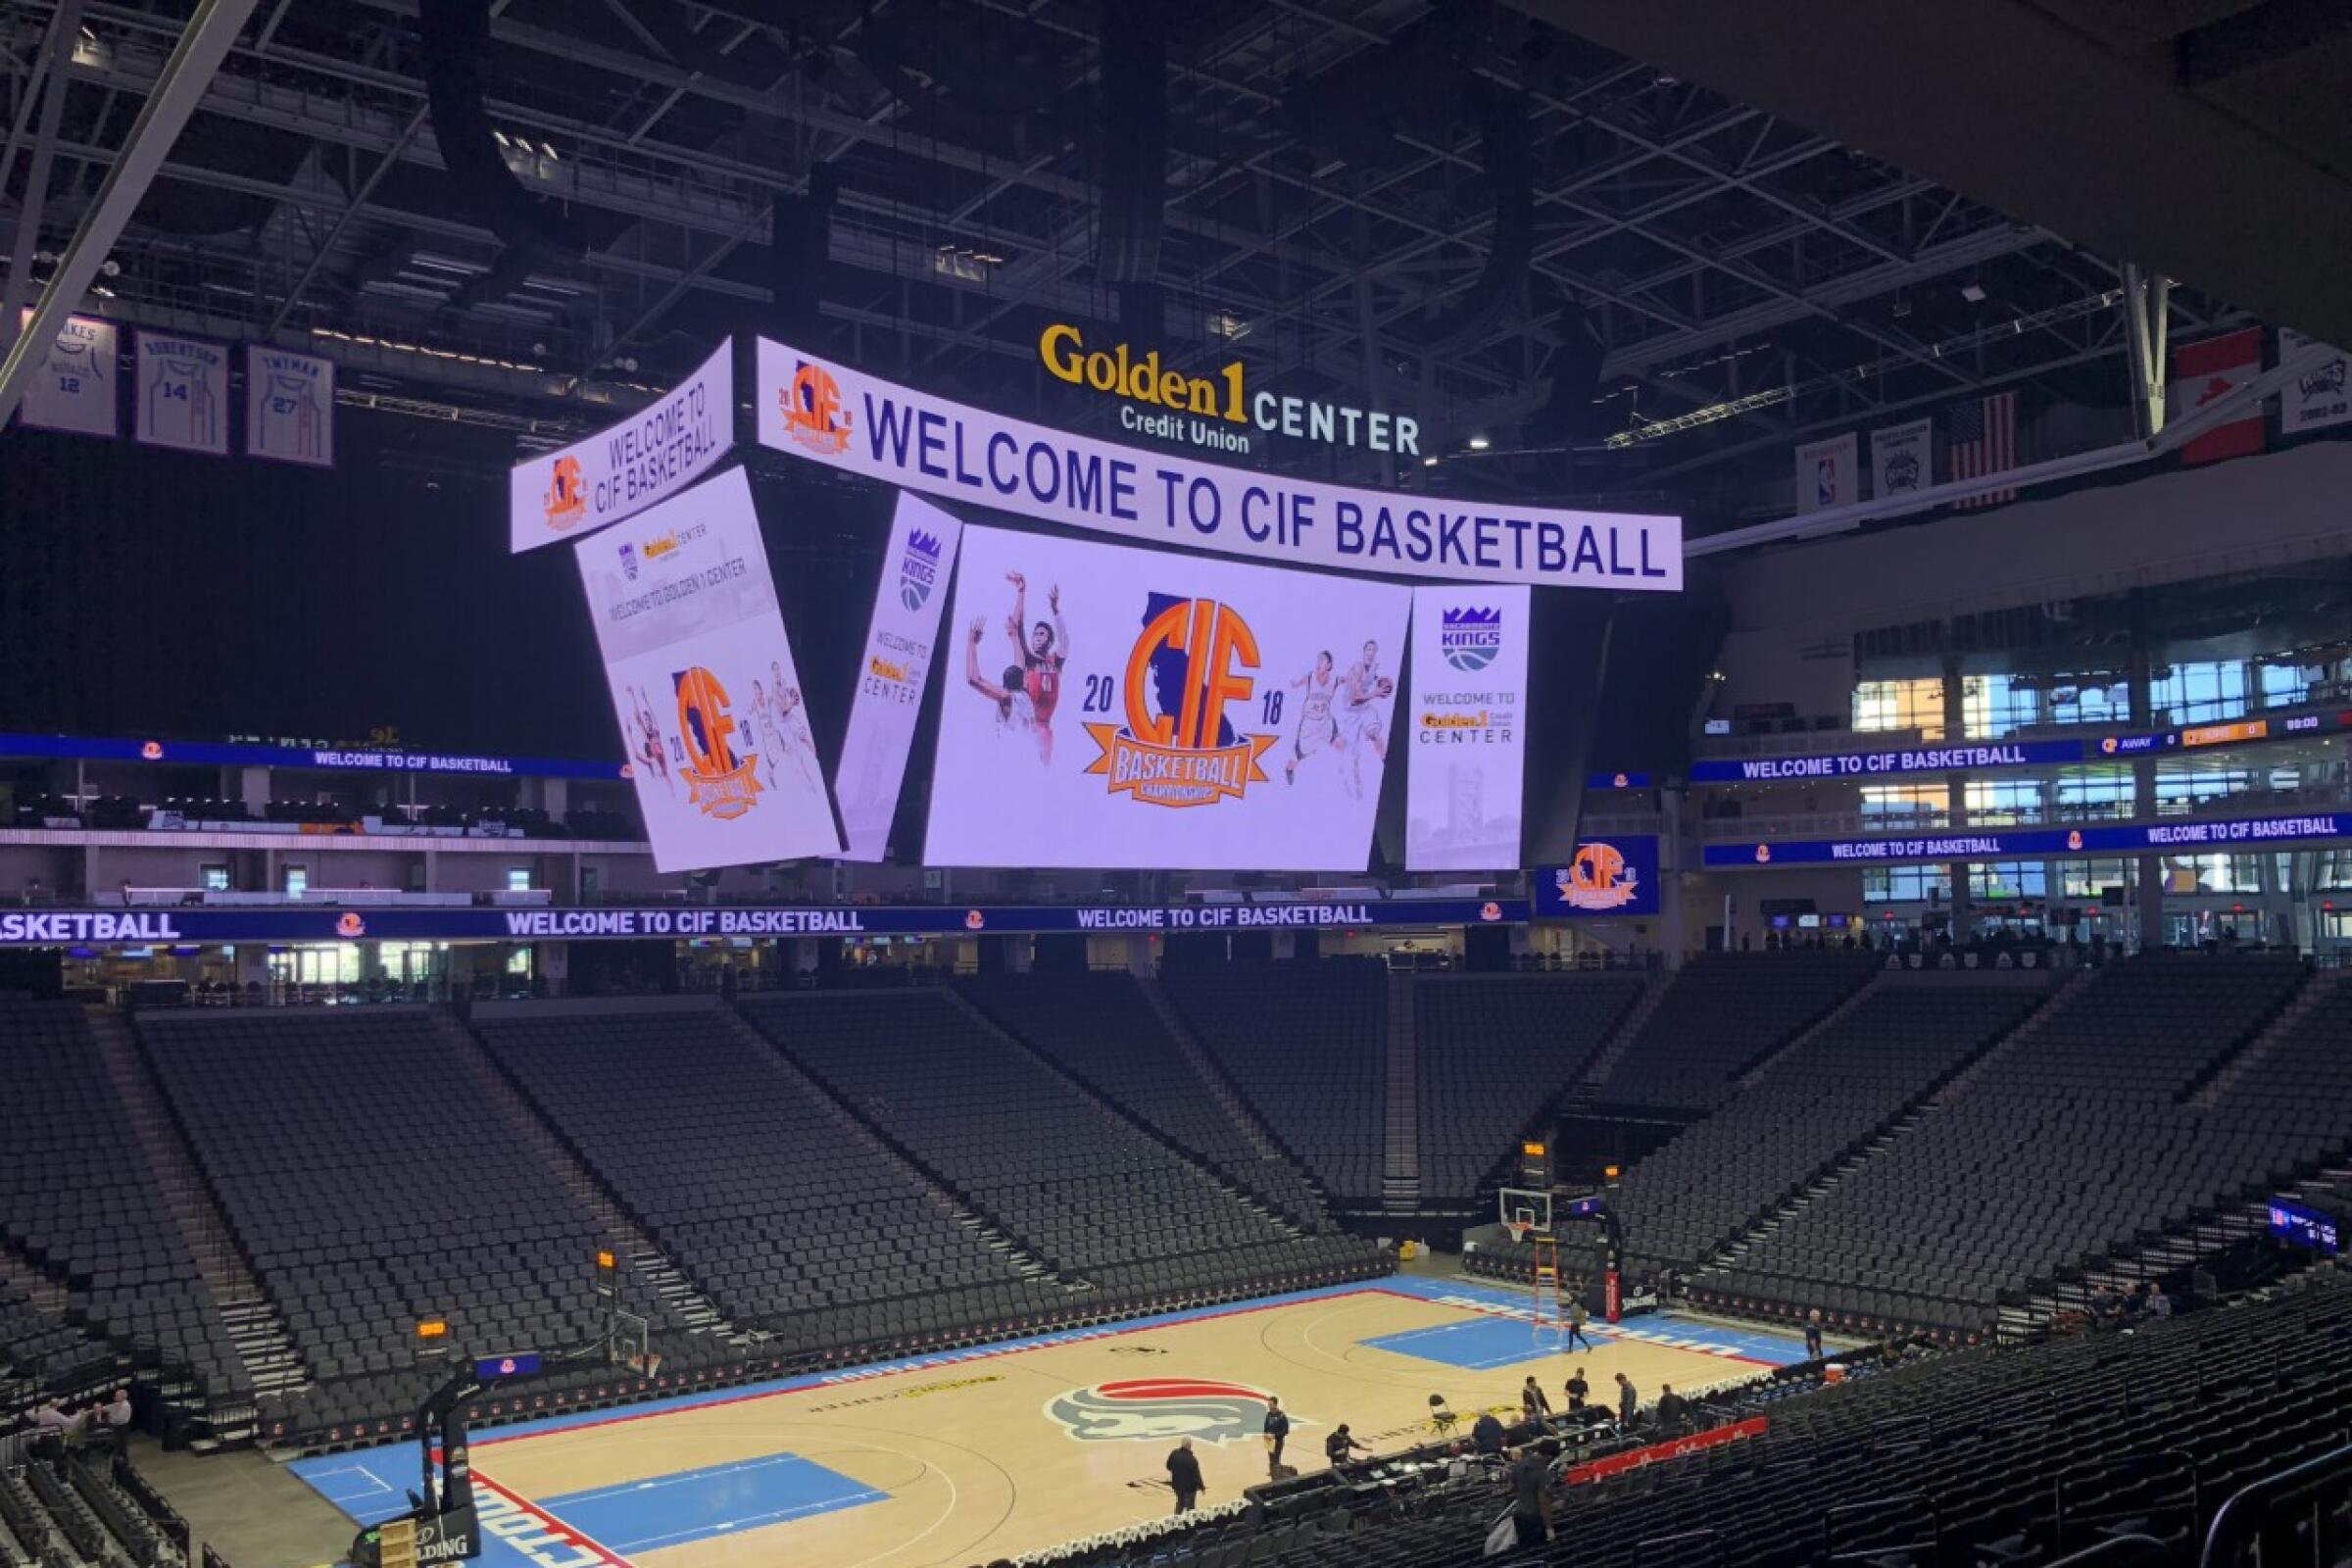 Golden 1 Center in Sacramento will play host to the state basketball championships this weekend.